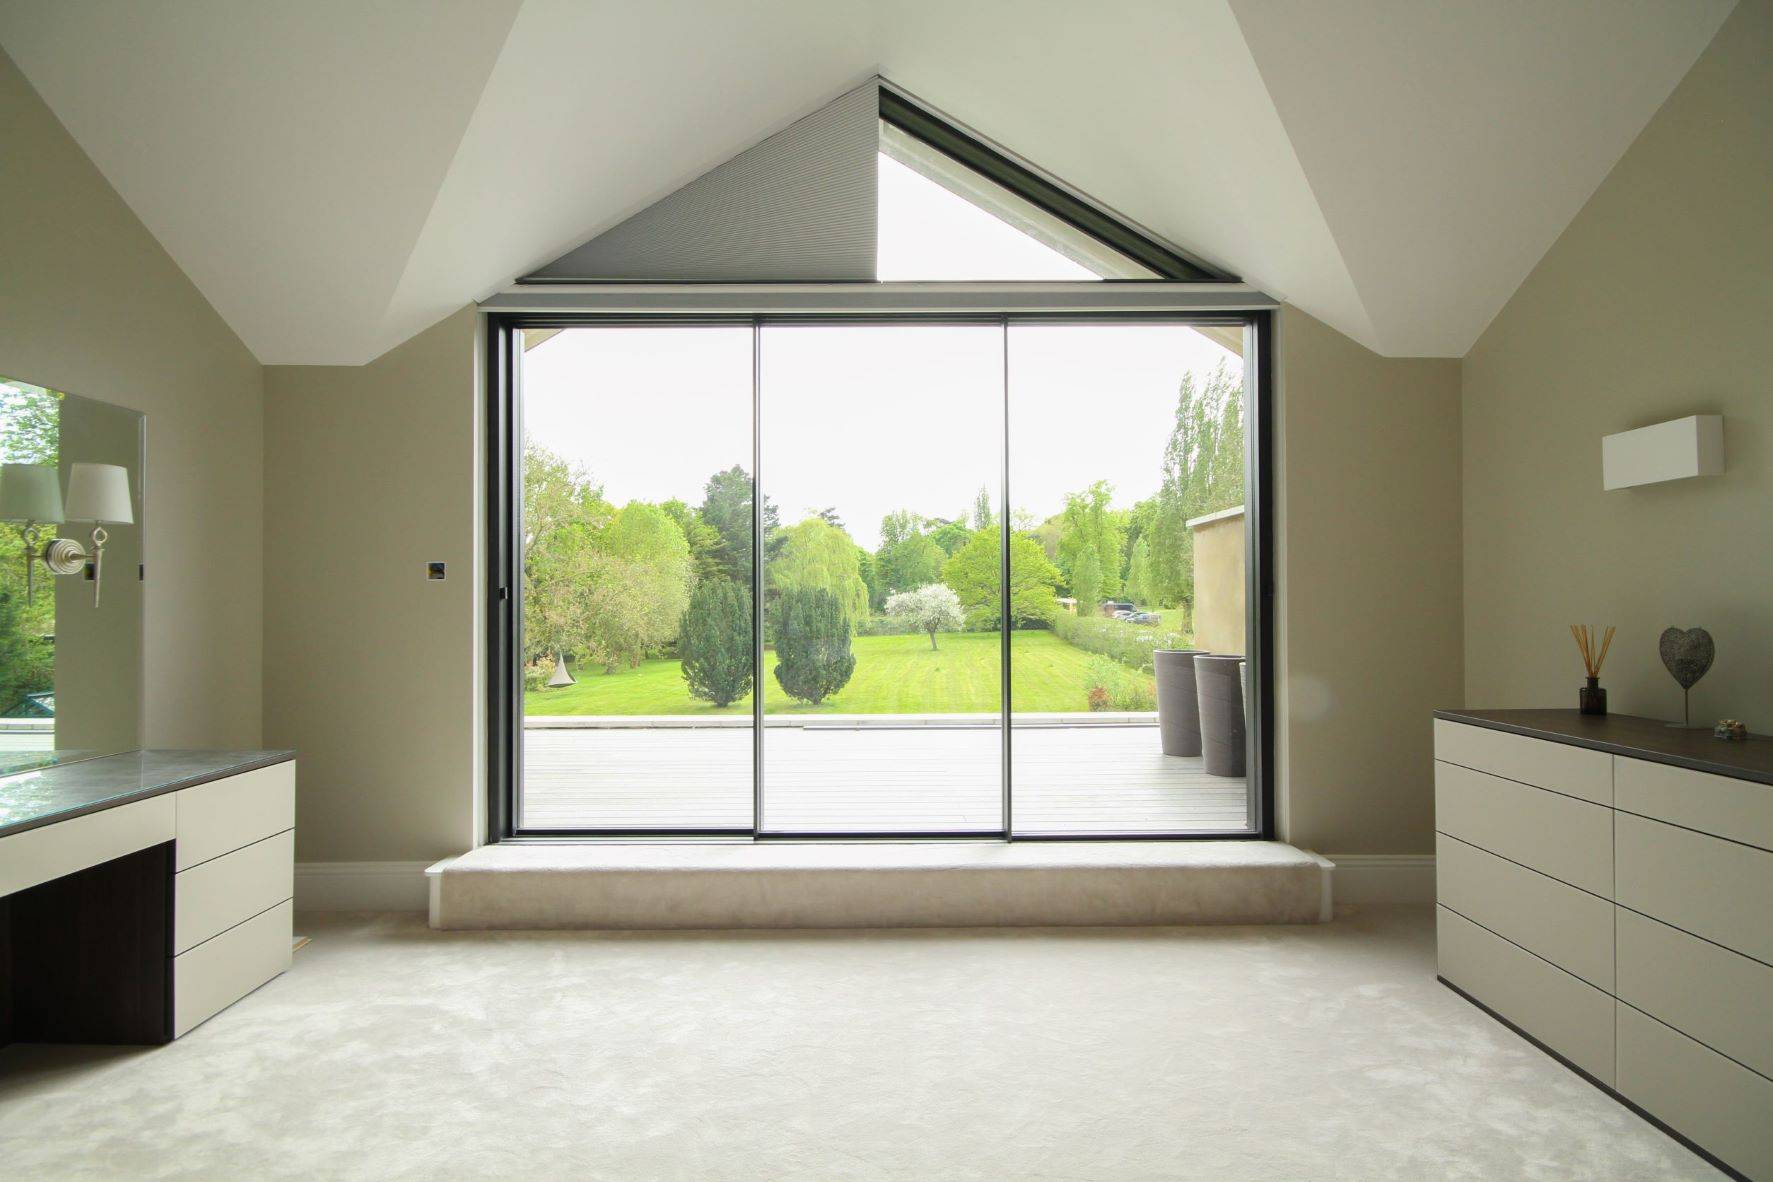 Blindspace Custom C Series to Conceal Blinds - Boxes to conceal blinds for any windows